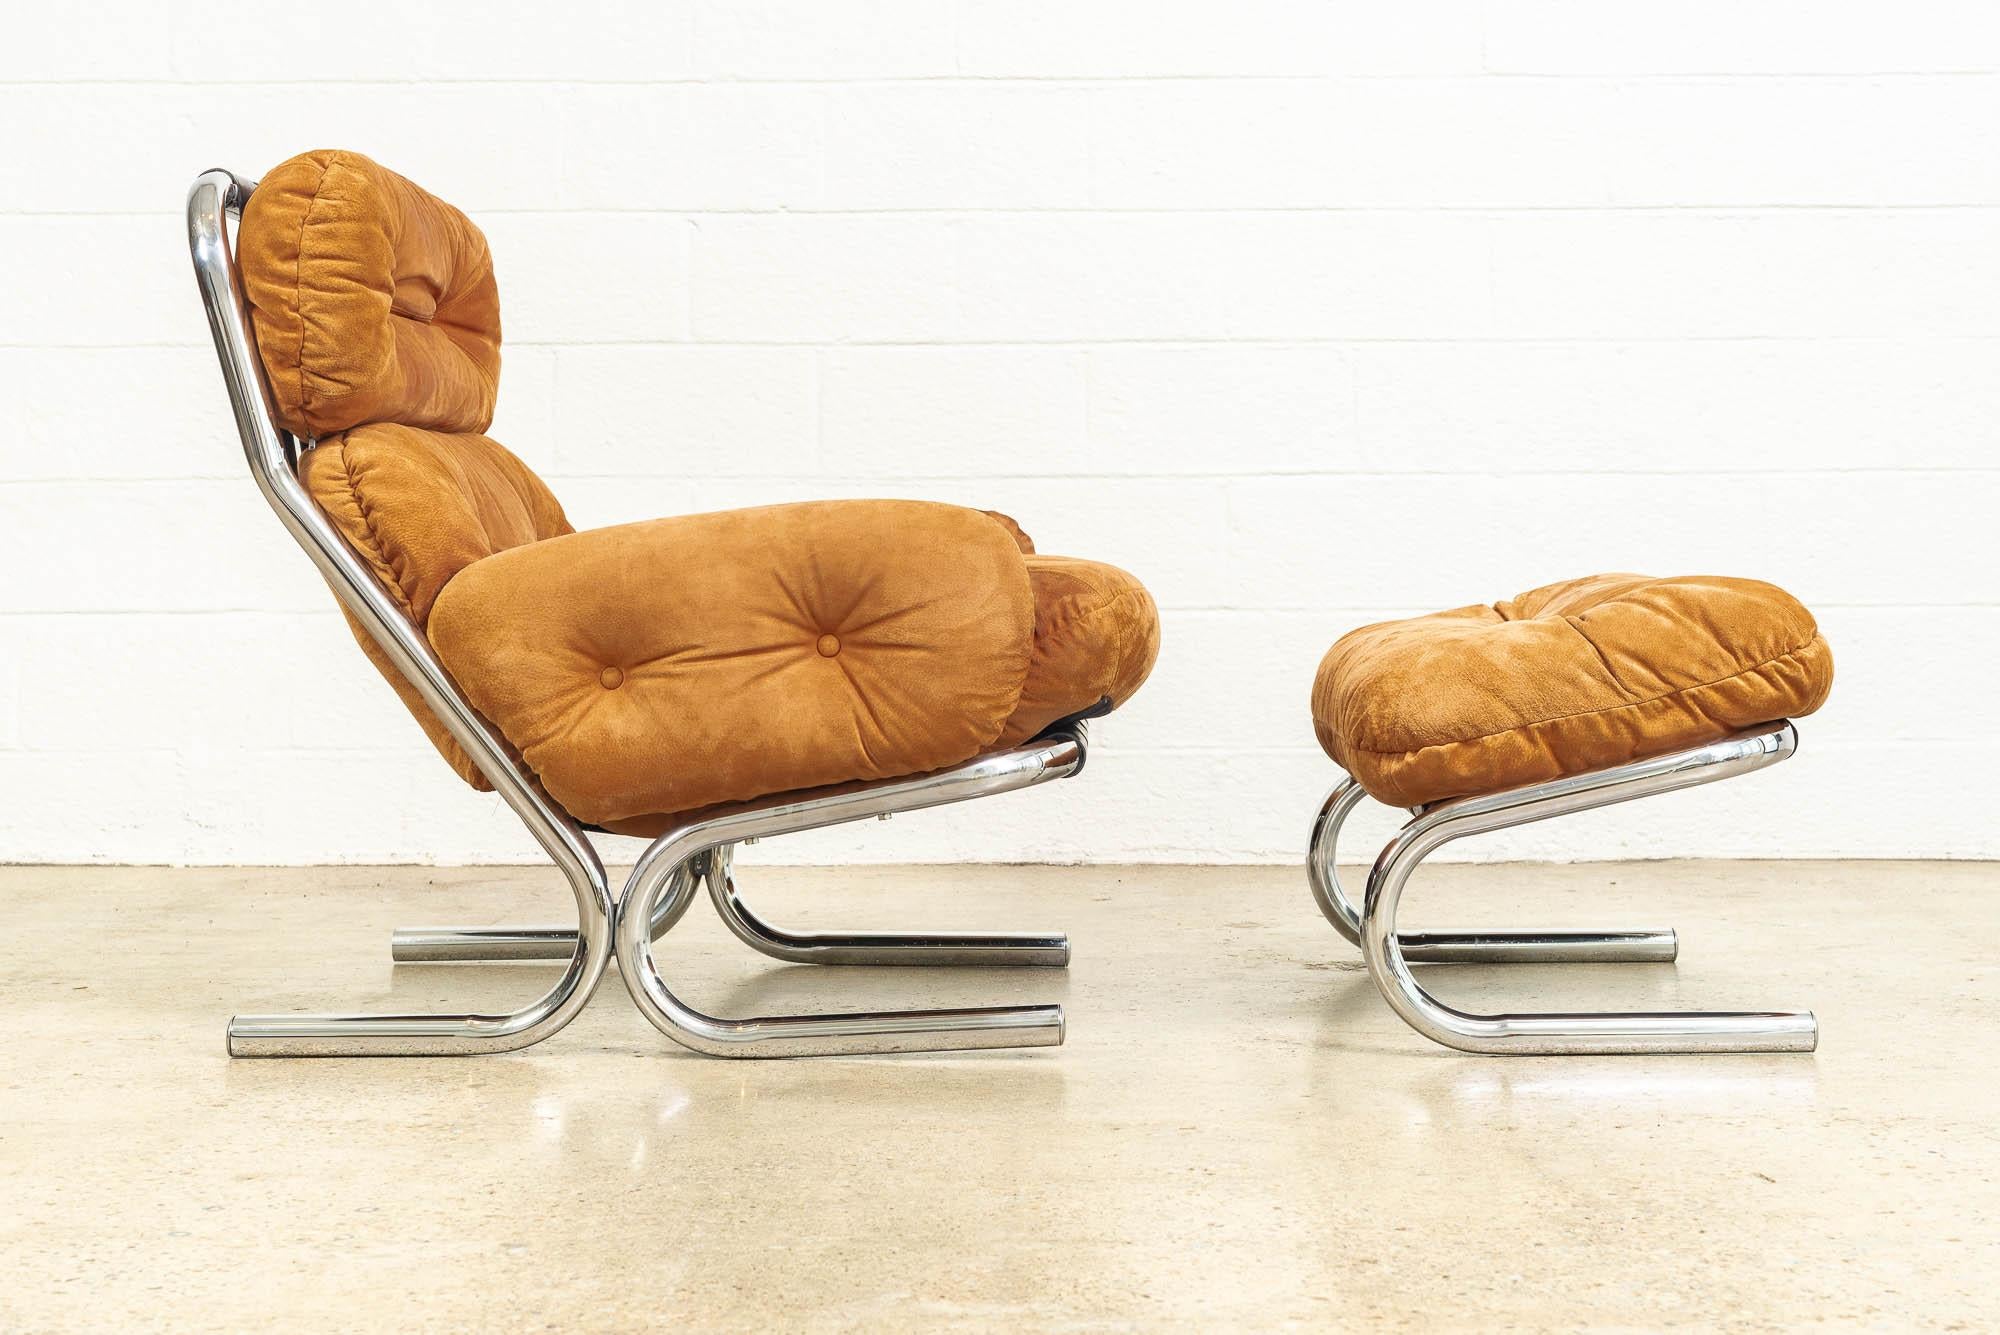 American Midcentury 1970s Milo Baughman for Directional Suede & Chrome Lounge Chair For Sale